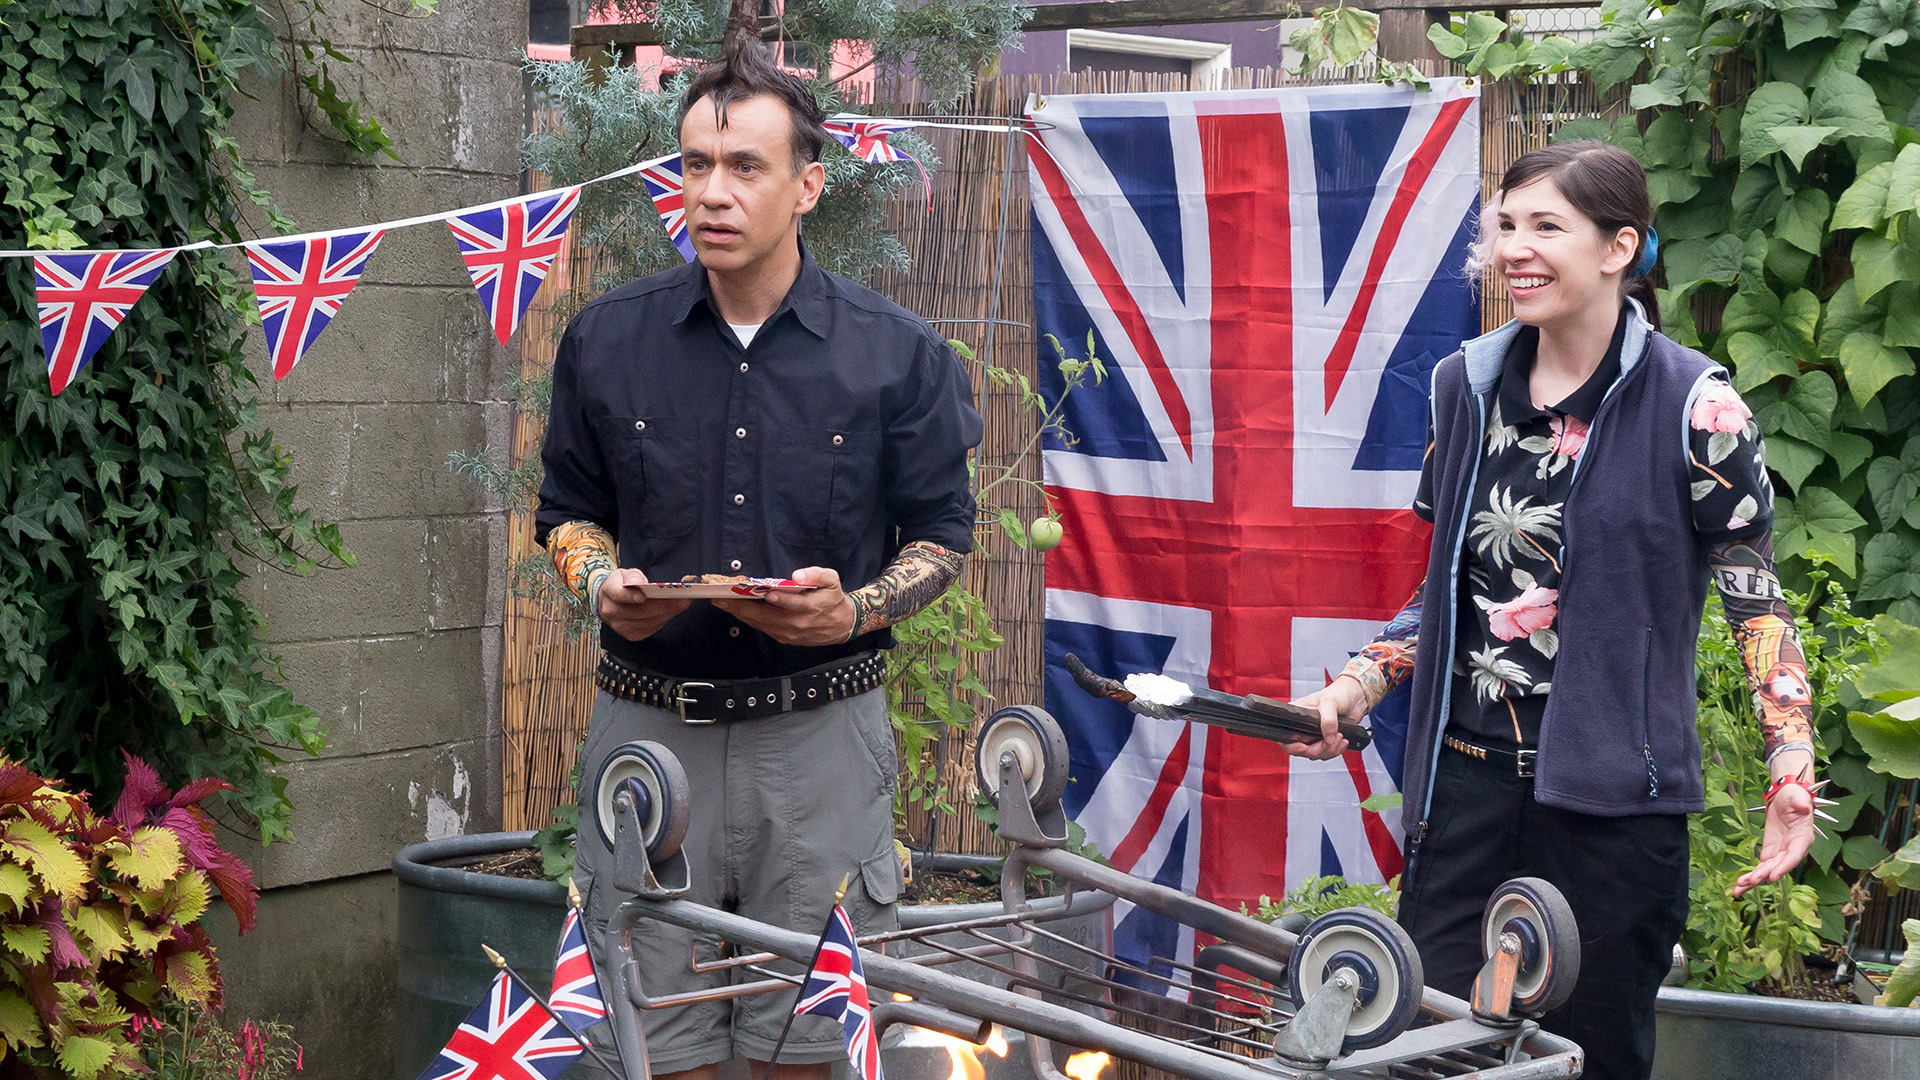 4th of July, Kath and Dave attempt the ultimate BBQ., TV-14, Season 1031154, Episode 5